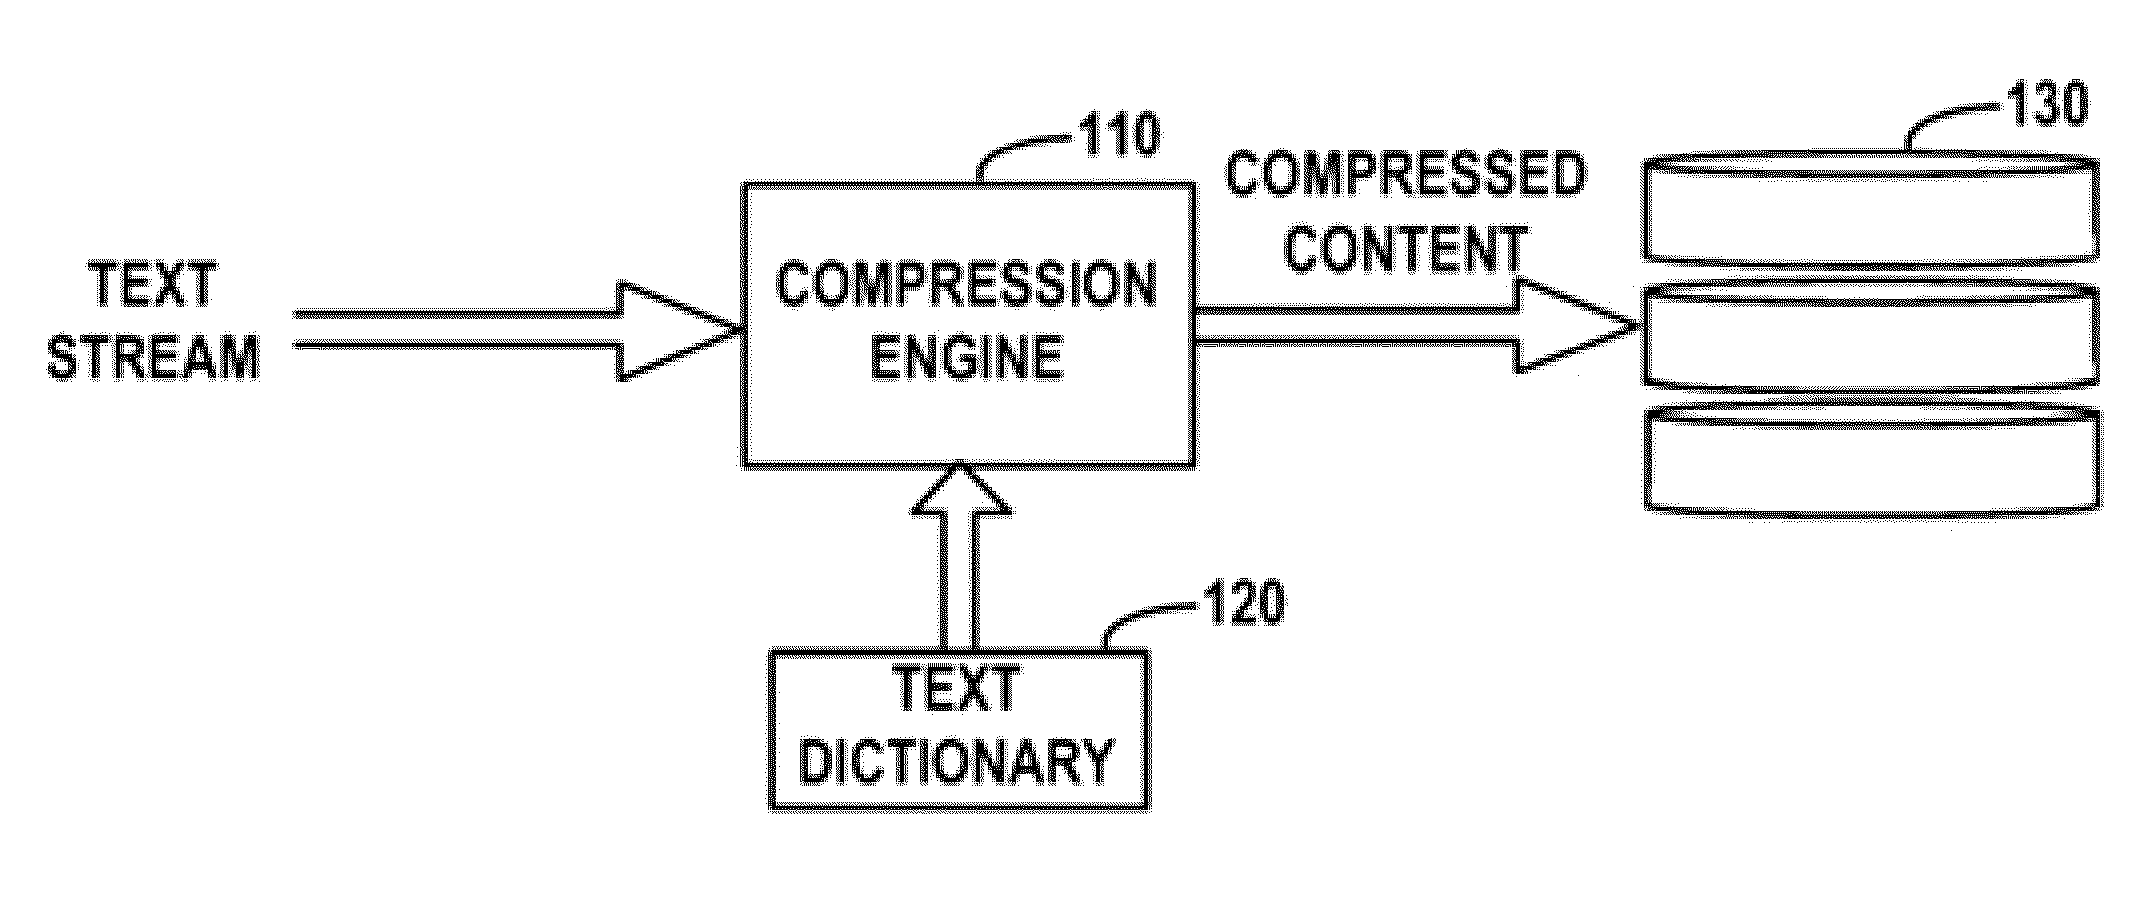 Text compression and decompression